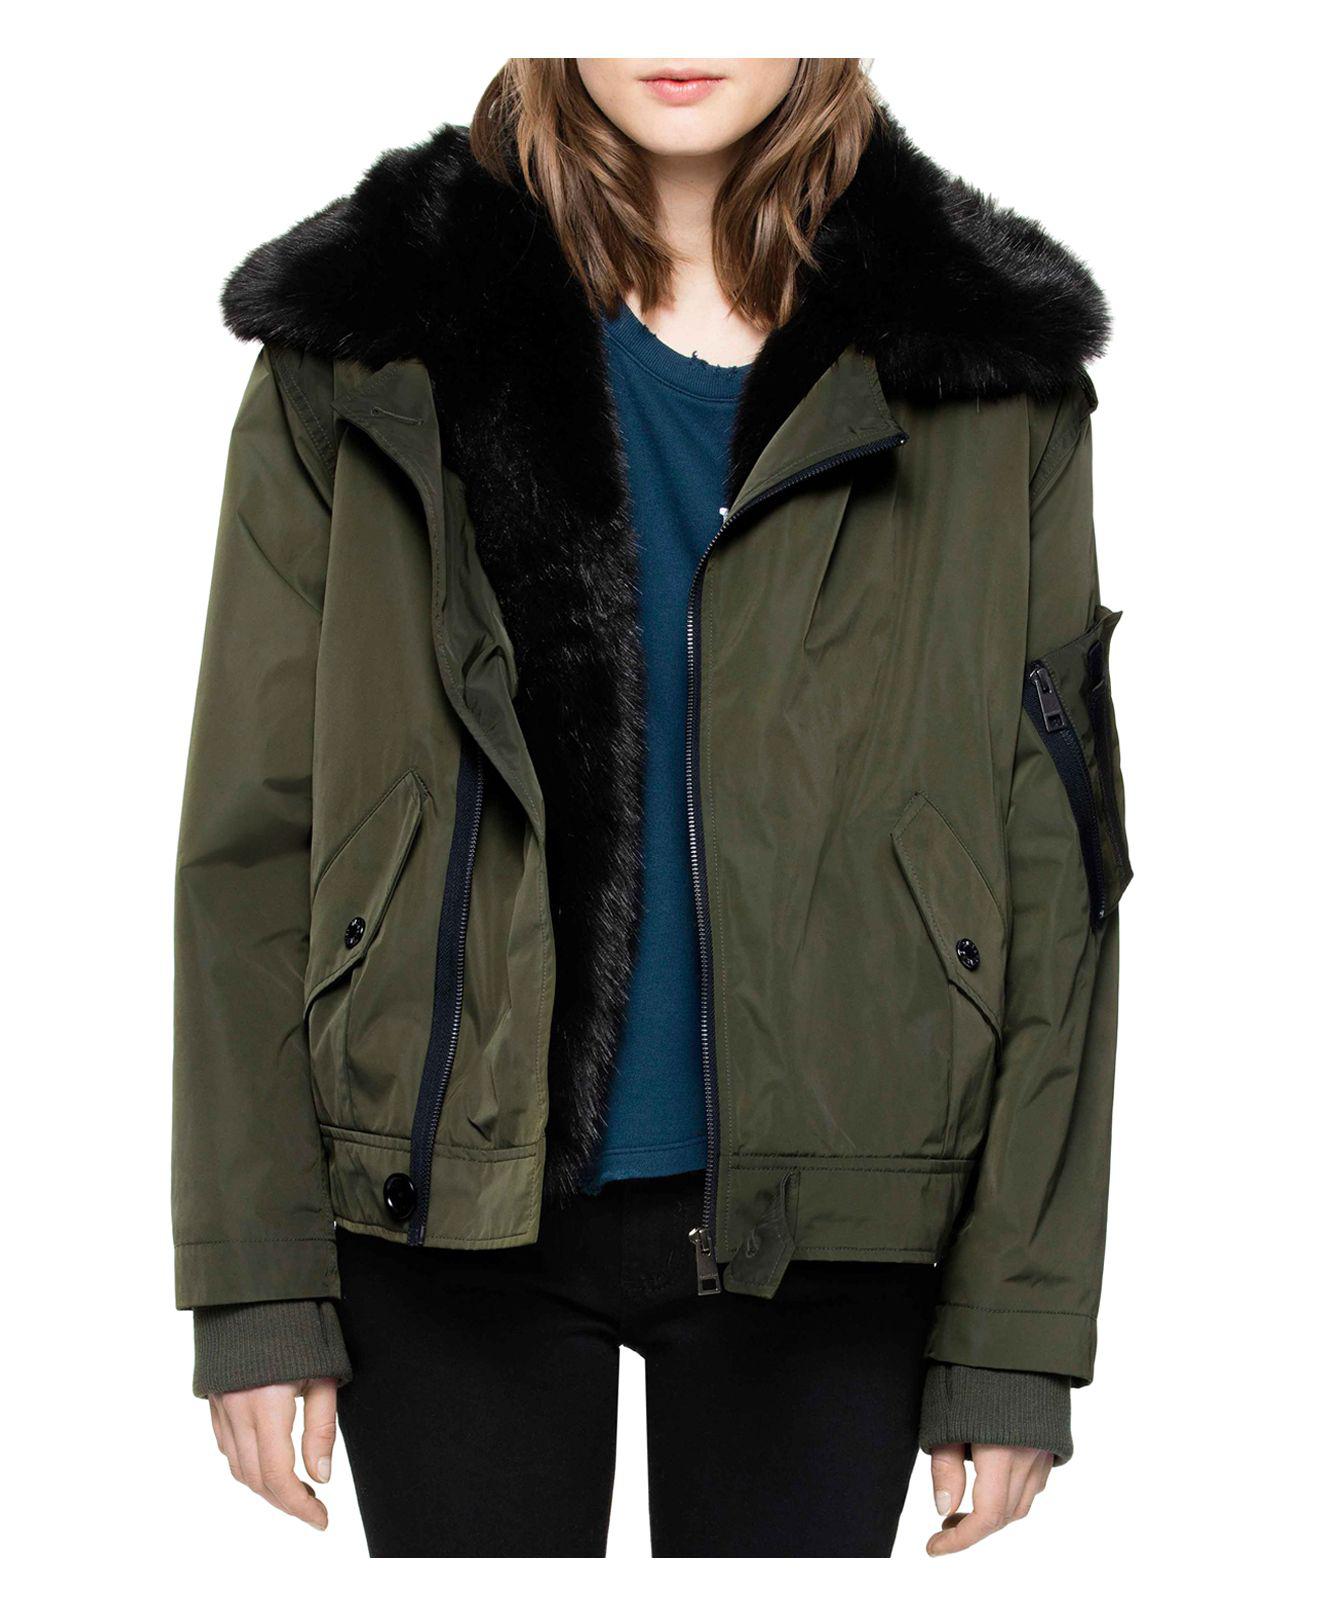 Zadig & voltaire Kassy Faux-fur-lined Coat in Green | Lyst